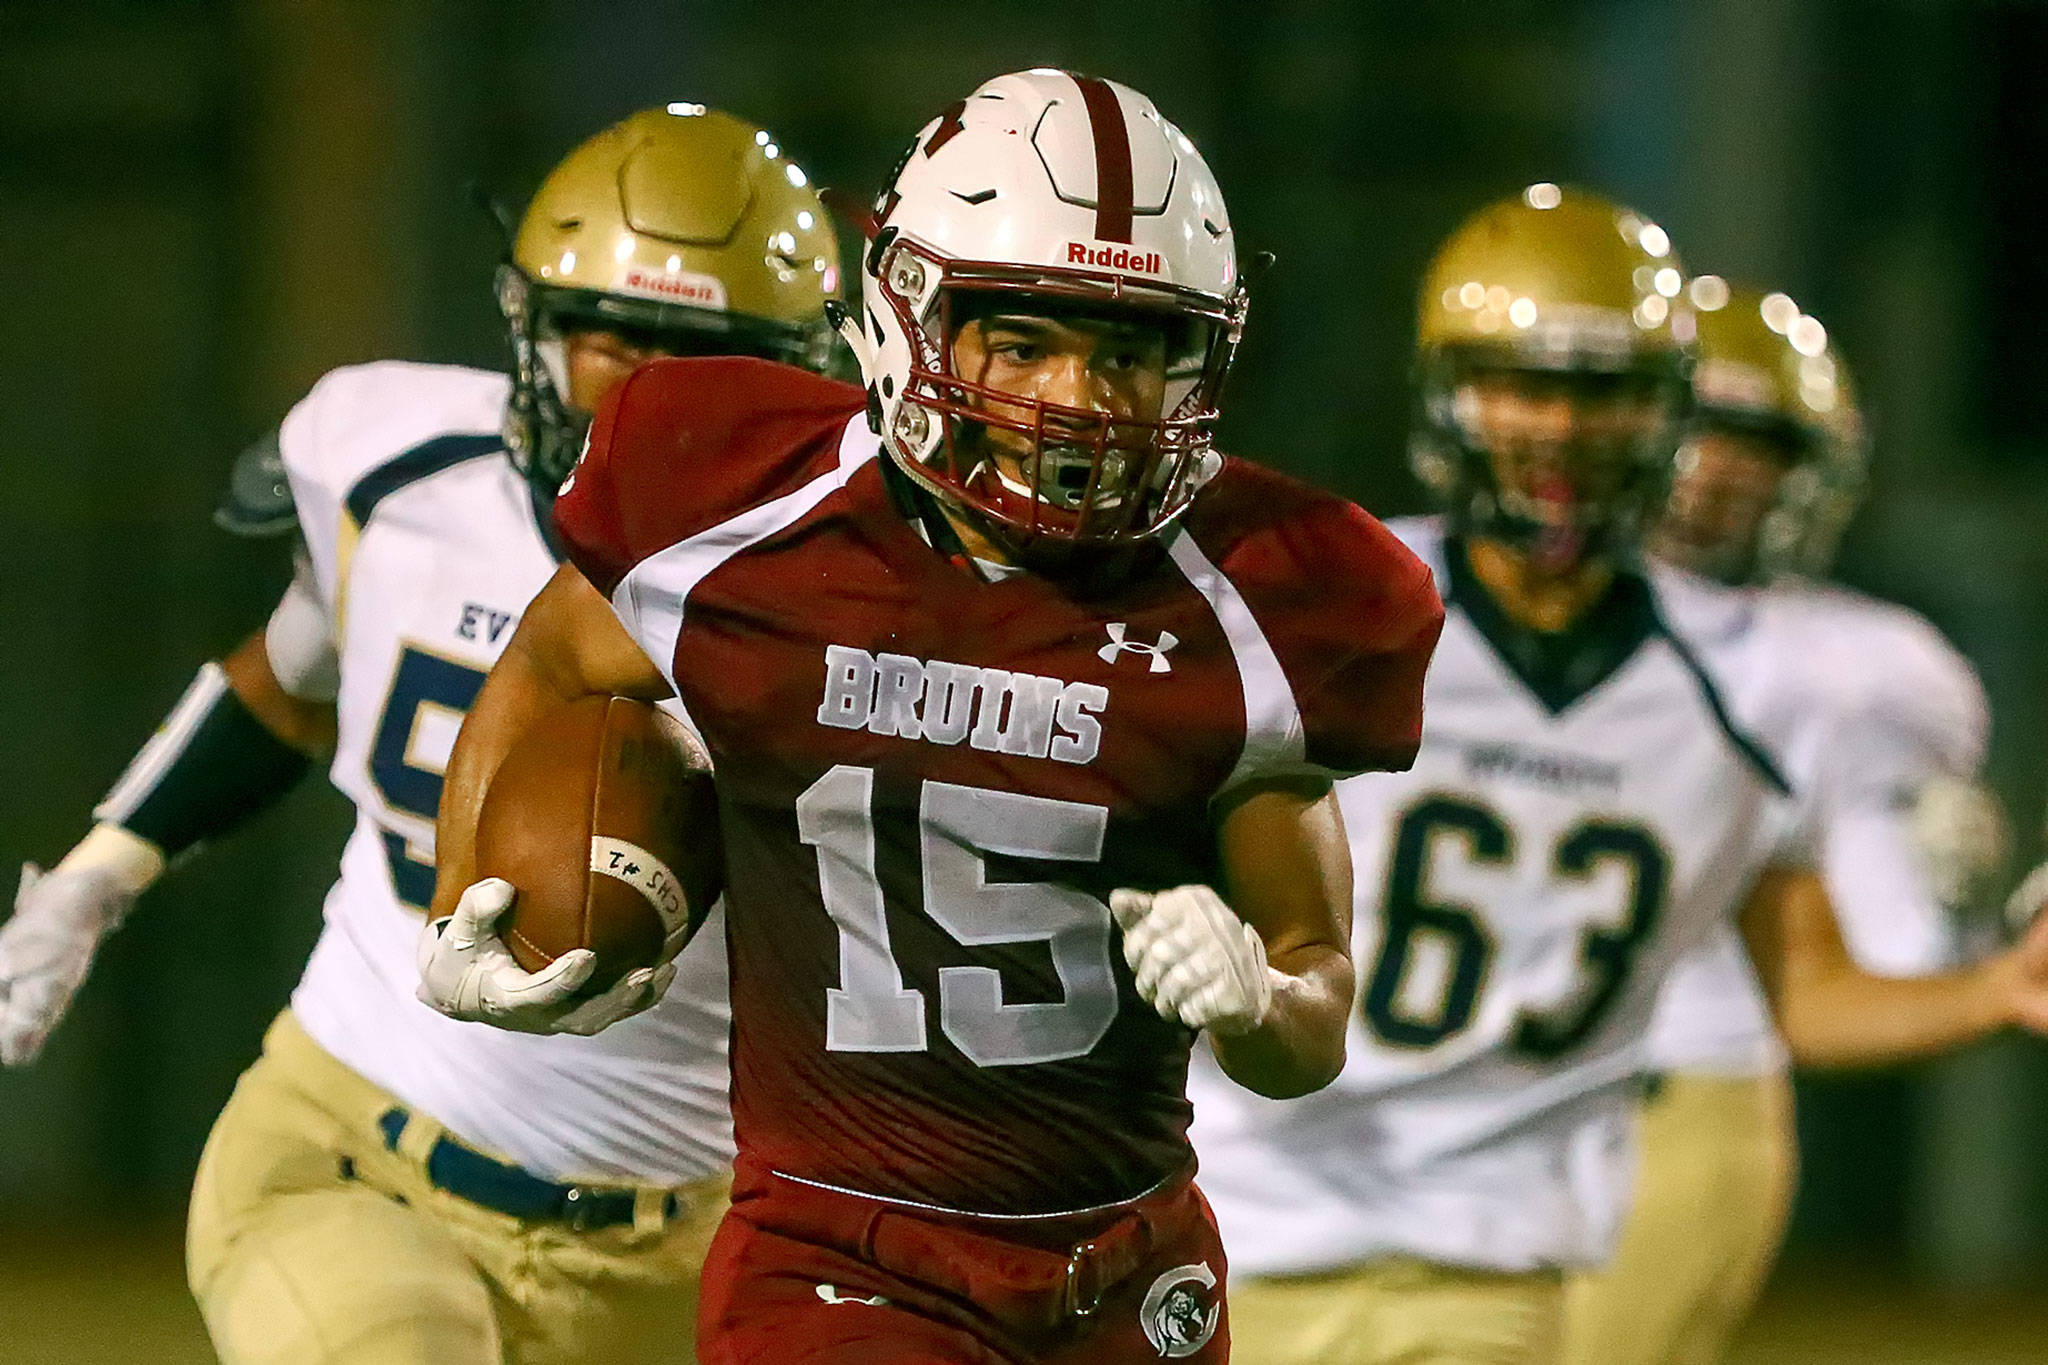 Davanta Murphy-McMillan ran for 334 yards and six touchdowns as Cascade routed Everett for its third consecutive win in the city rivalry. (Kevin Clark / The Herald)